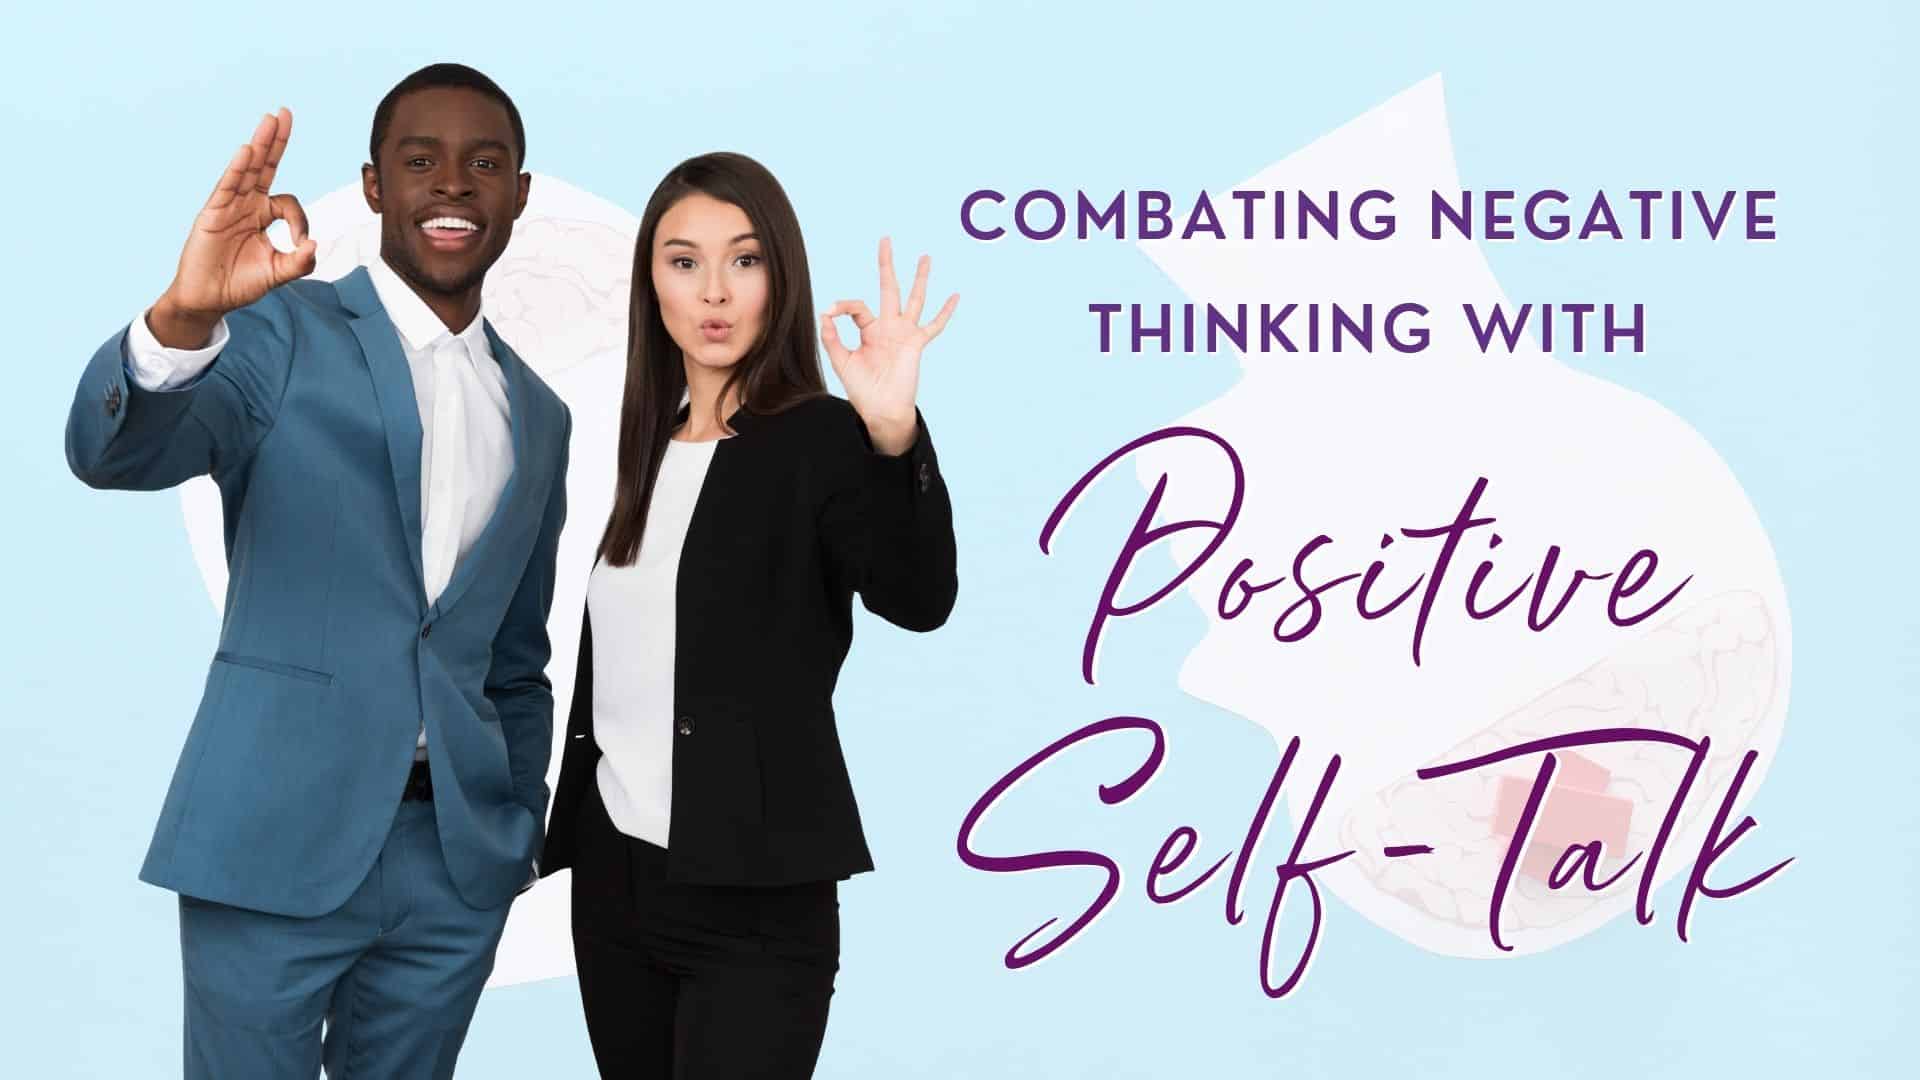 Combating Negative Thinking with Positive Self-Talk